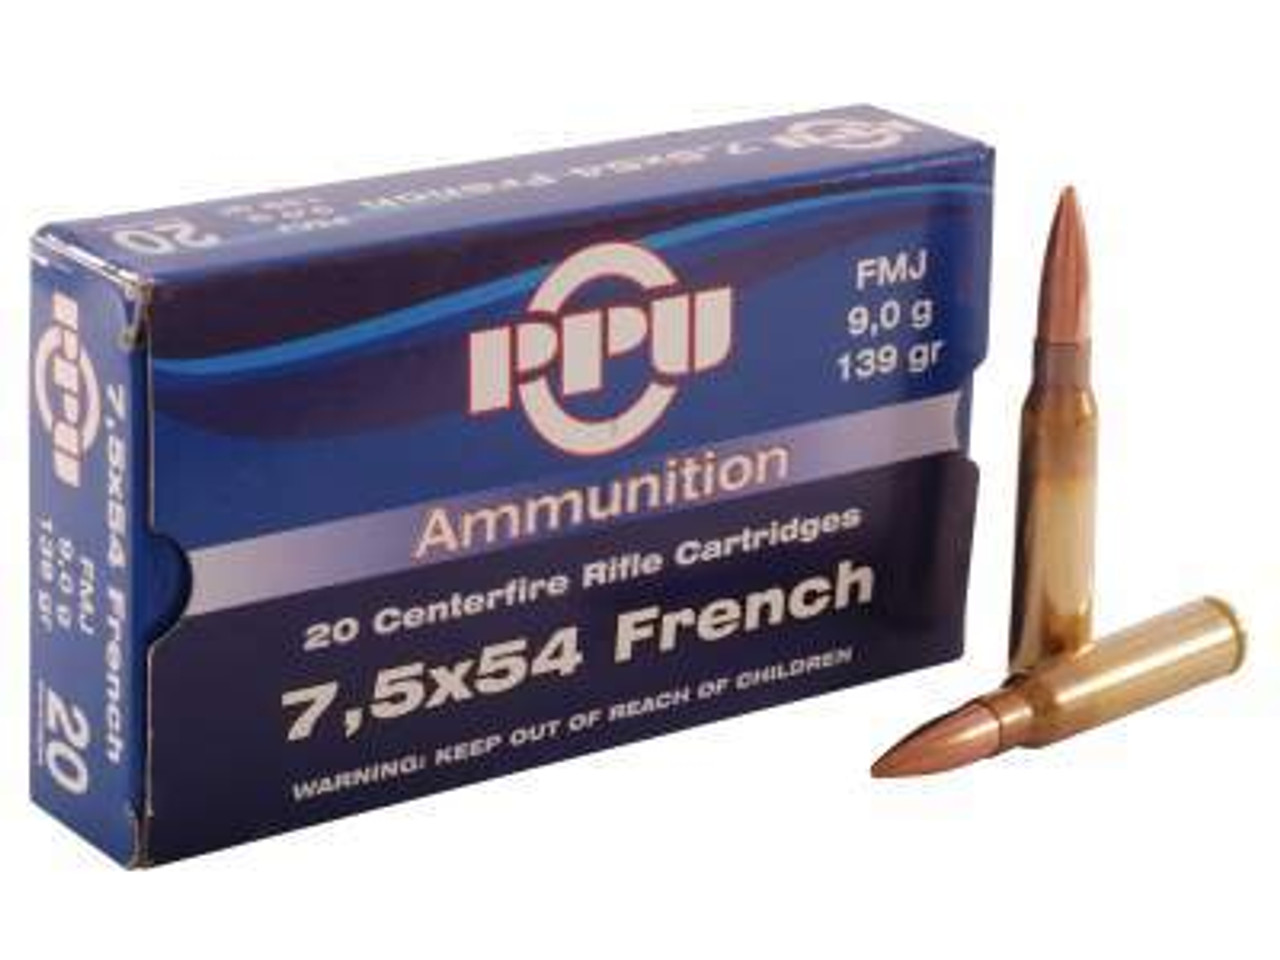 7.5x54mm French Ammo